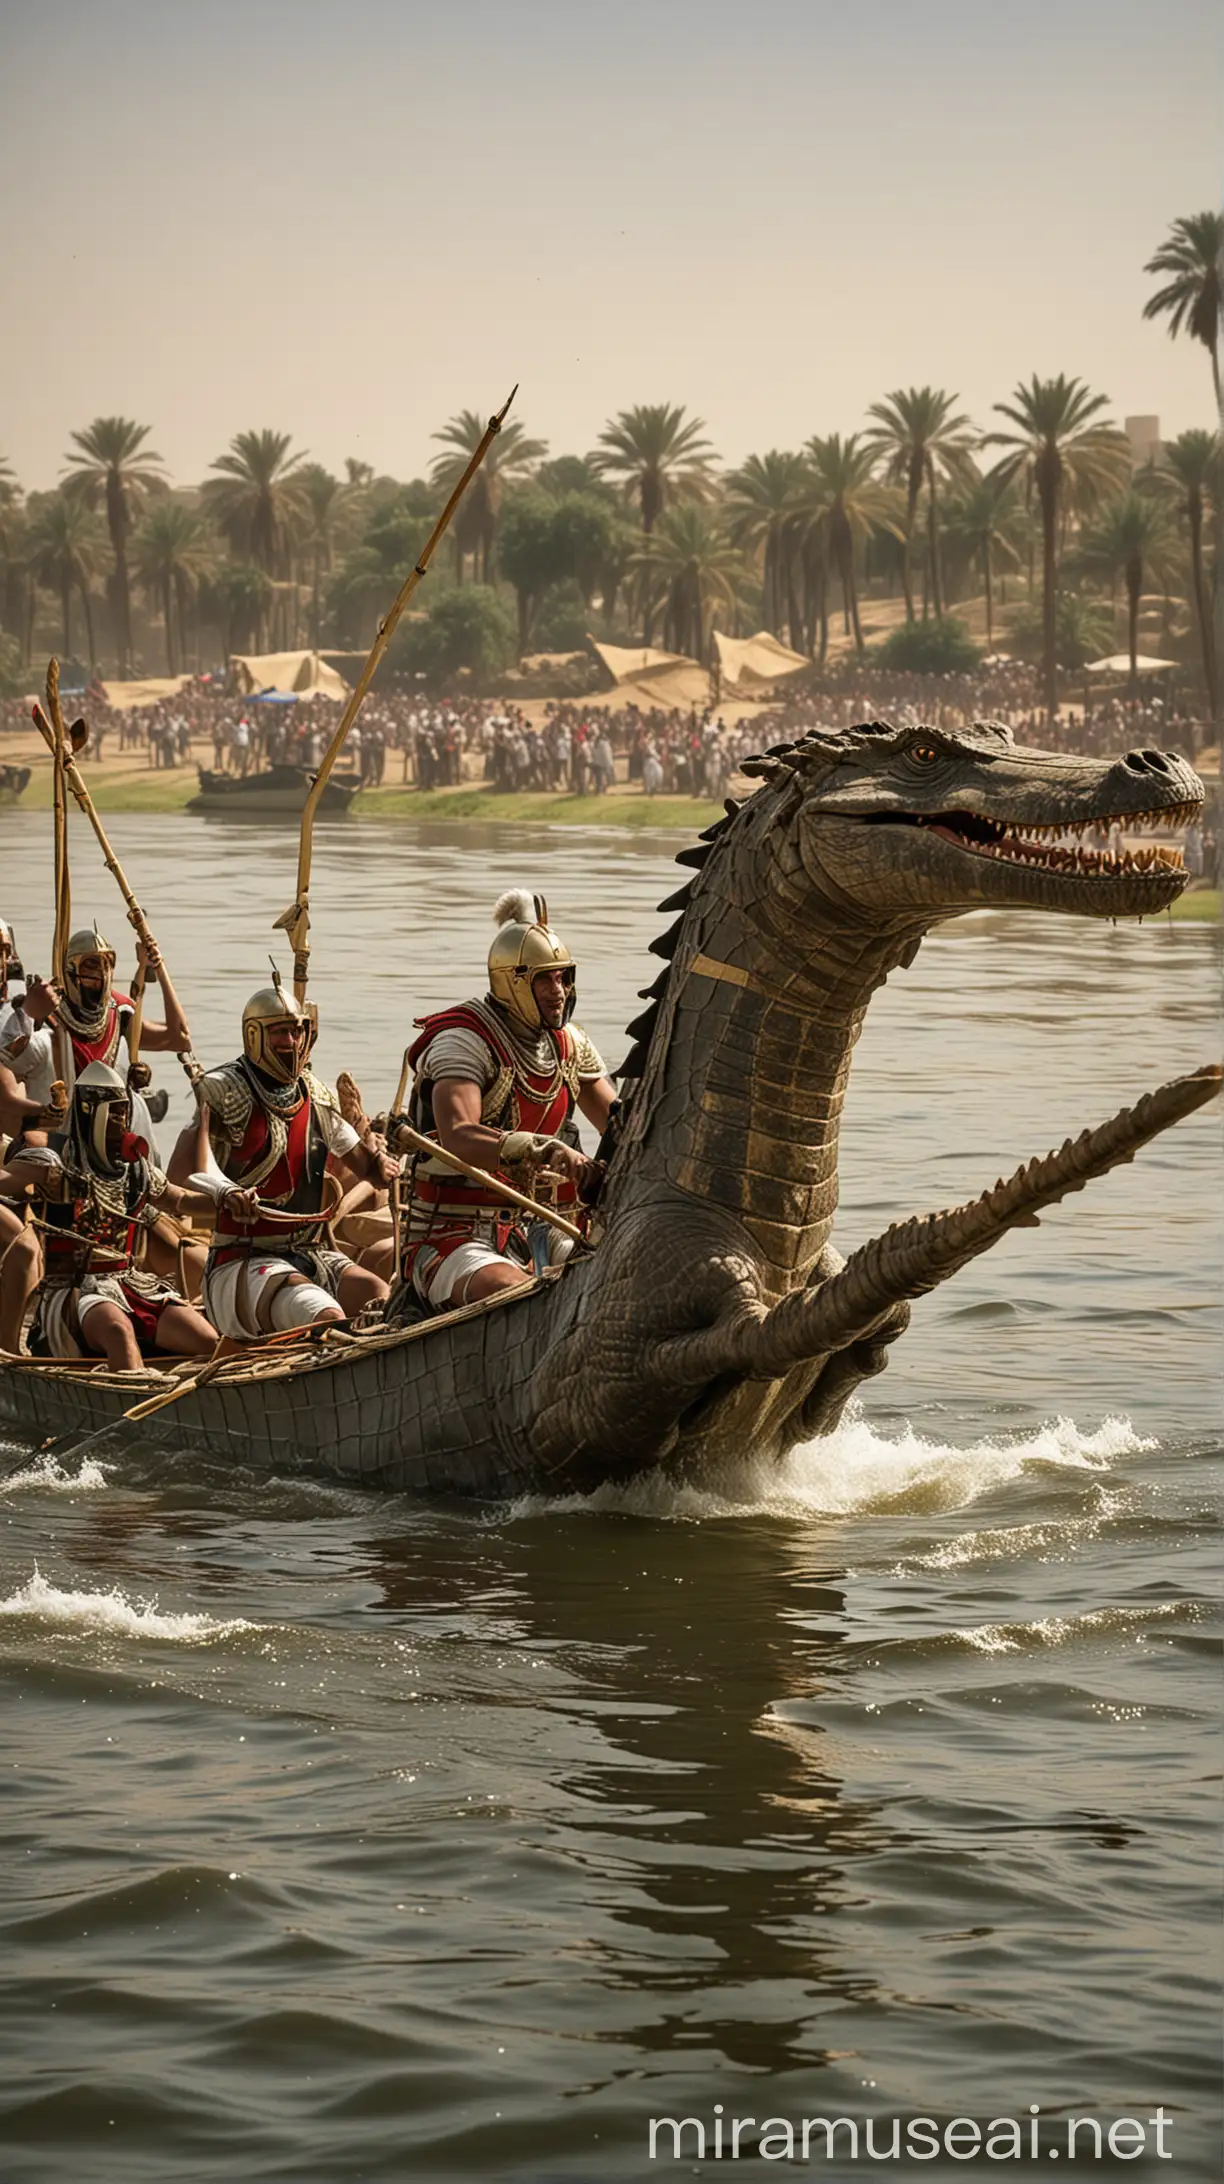 "A dynamic image of Egyptian jousting on the Nile, with players rowing towards each other and clashing oars, and a crocodile lurking in the water below." hyper realistic